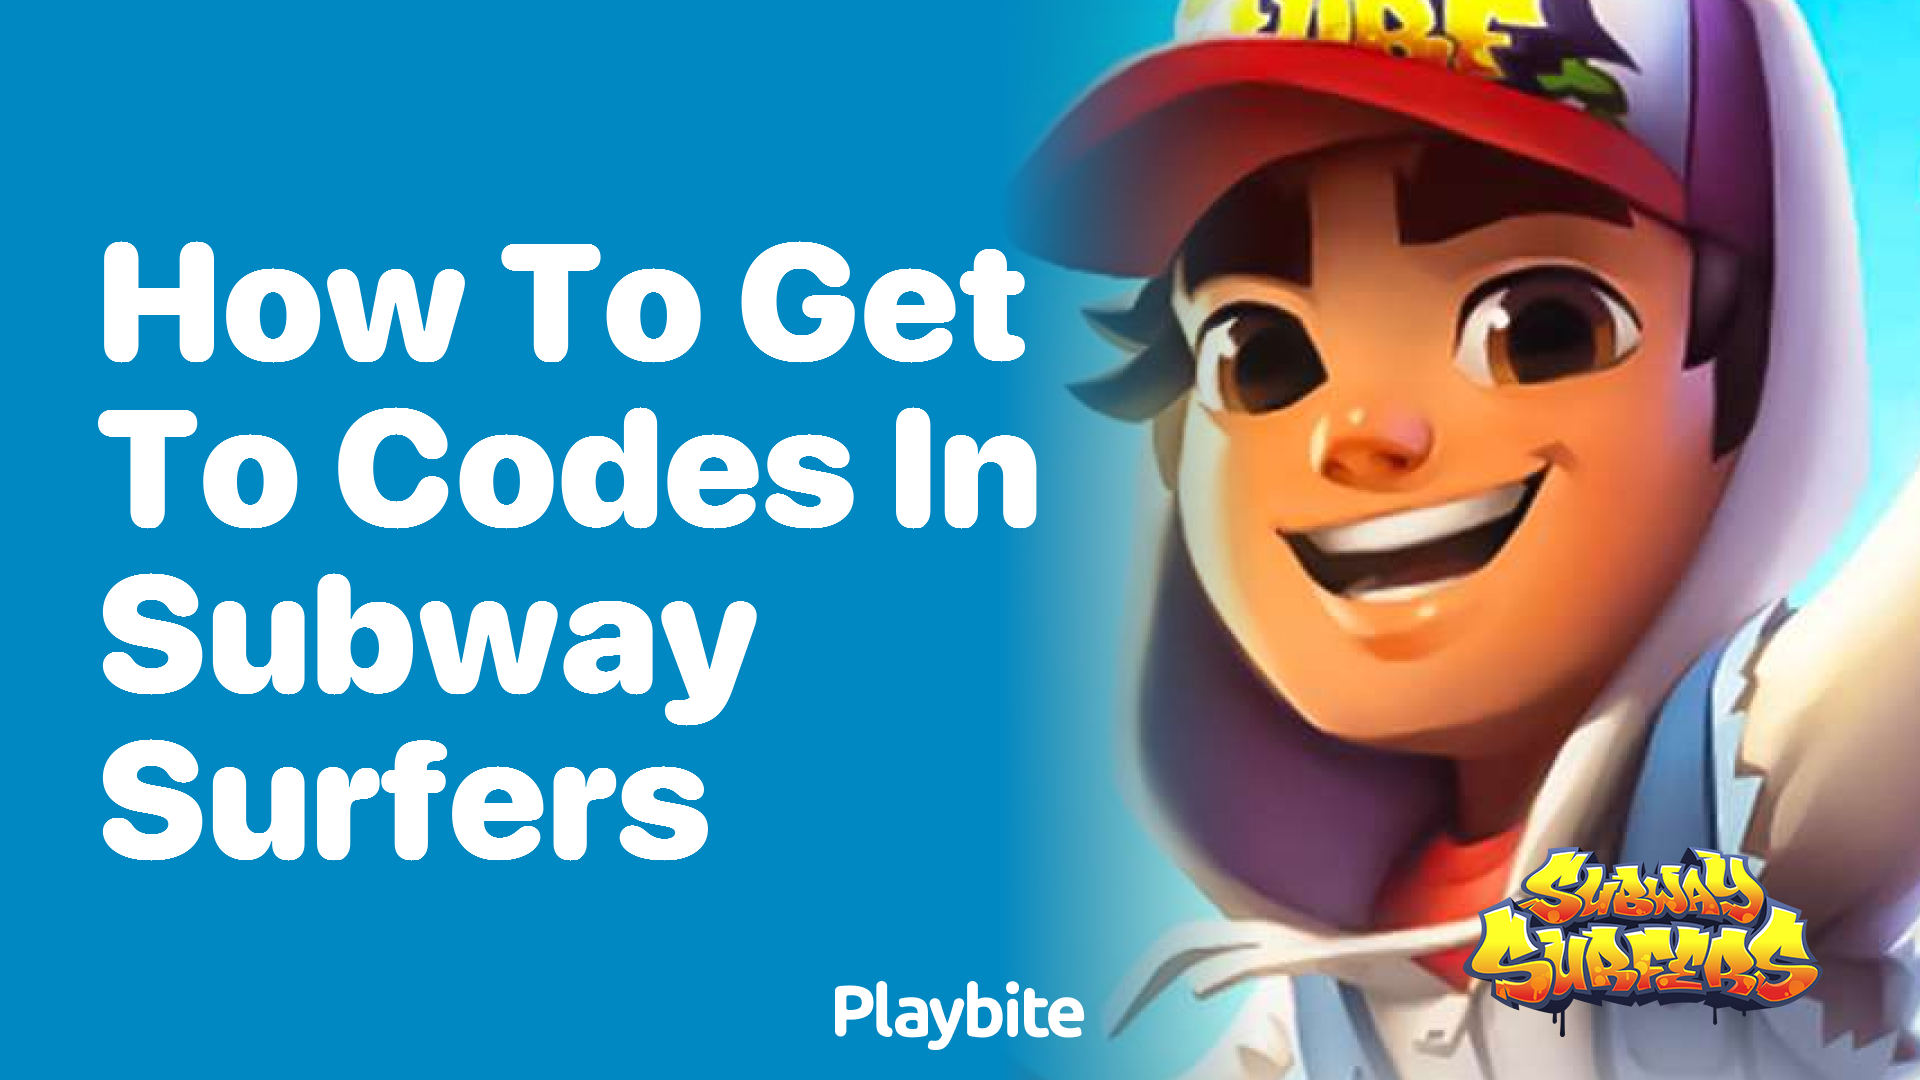 How to get codes in Subway Surfers?